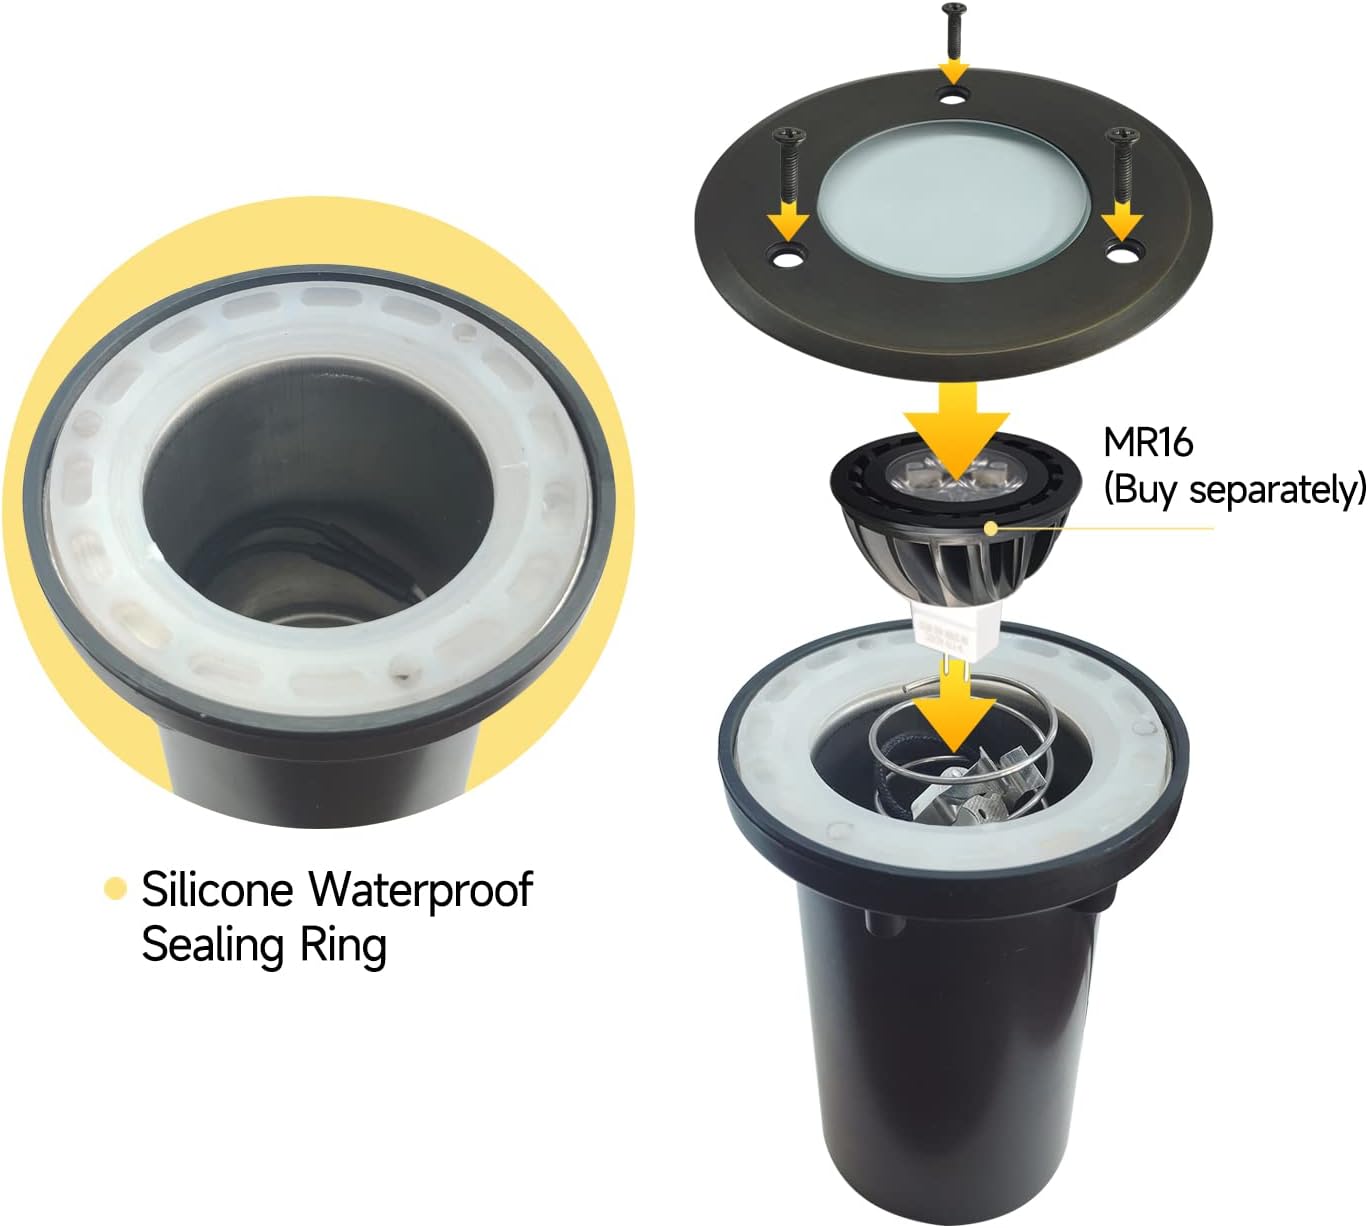 LED In-Ground Well Light COG303B with Silicone Waterproof Sealing Ring and MR16 Socket for Landscape Tree Lighting